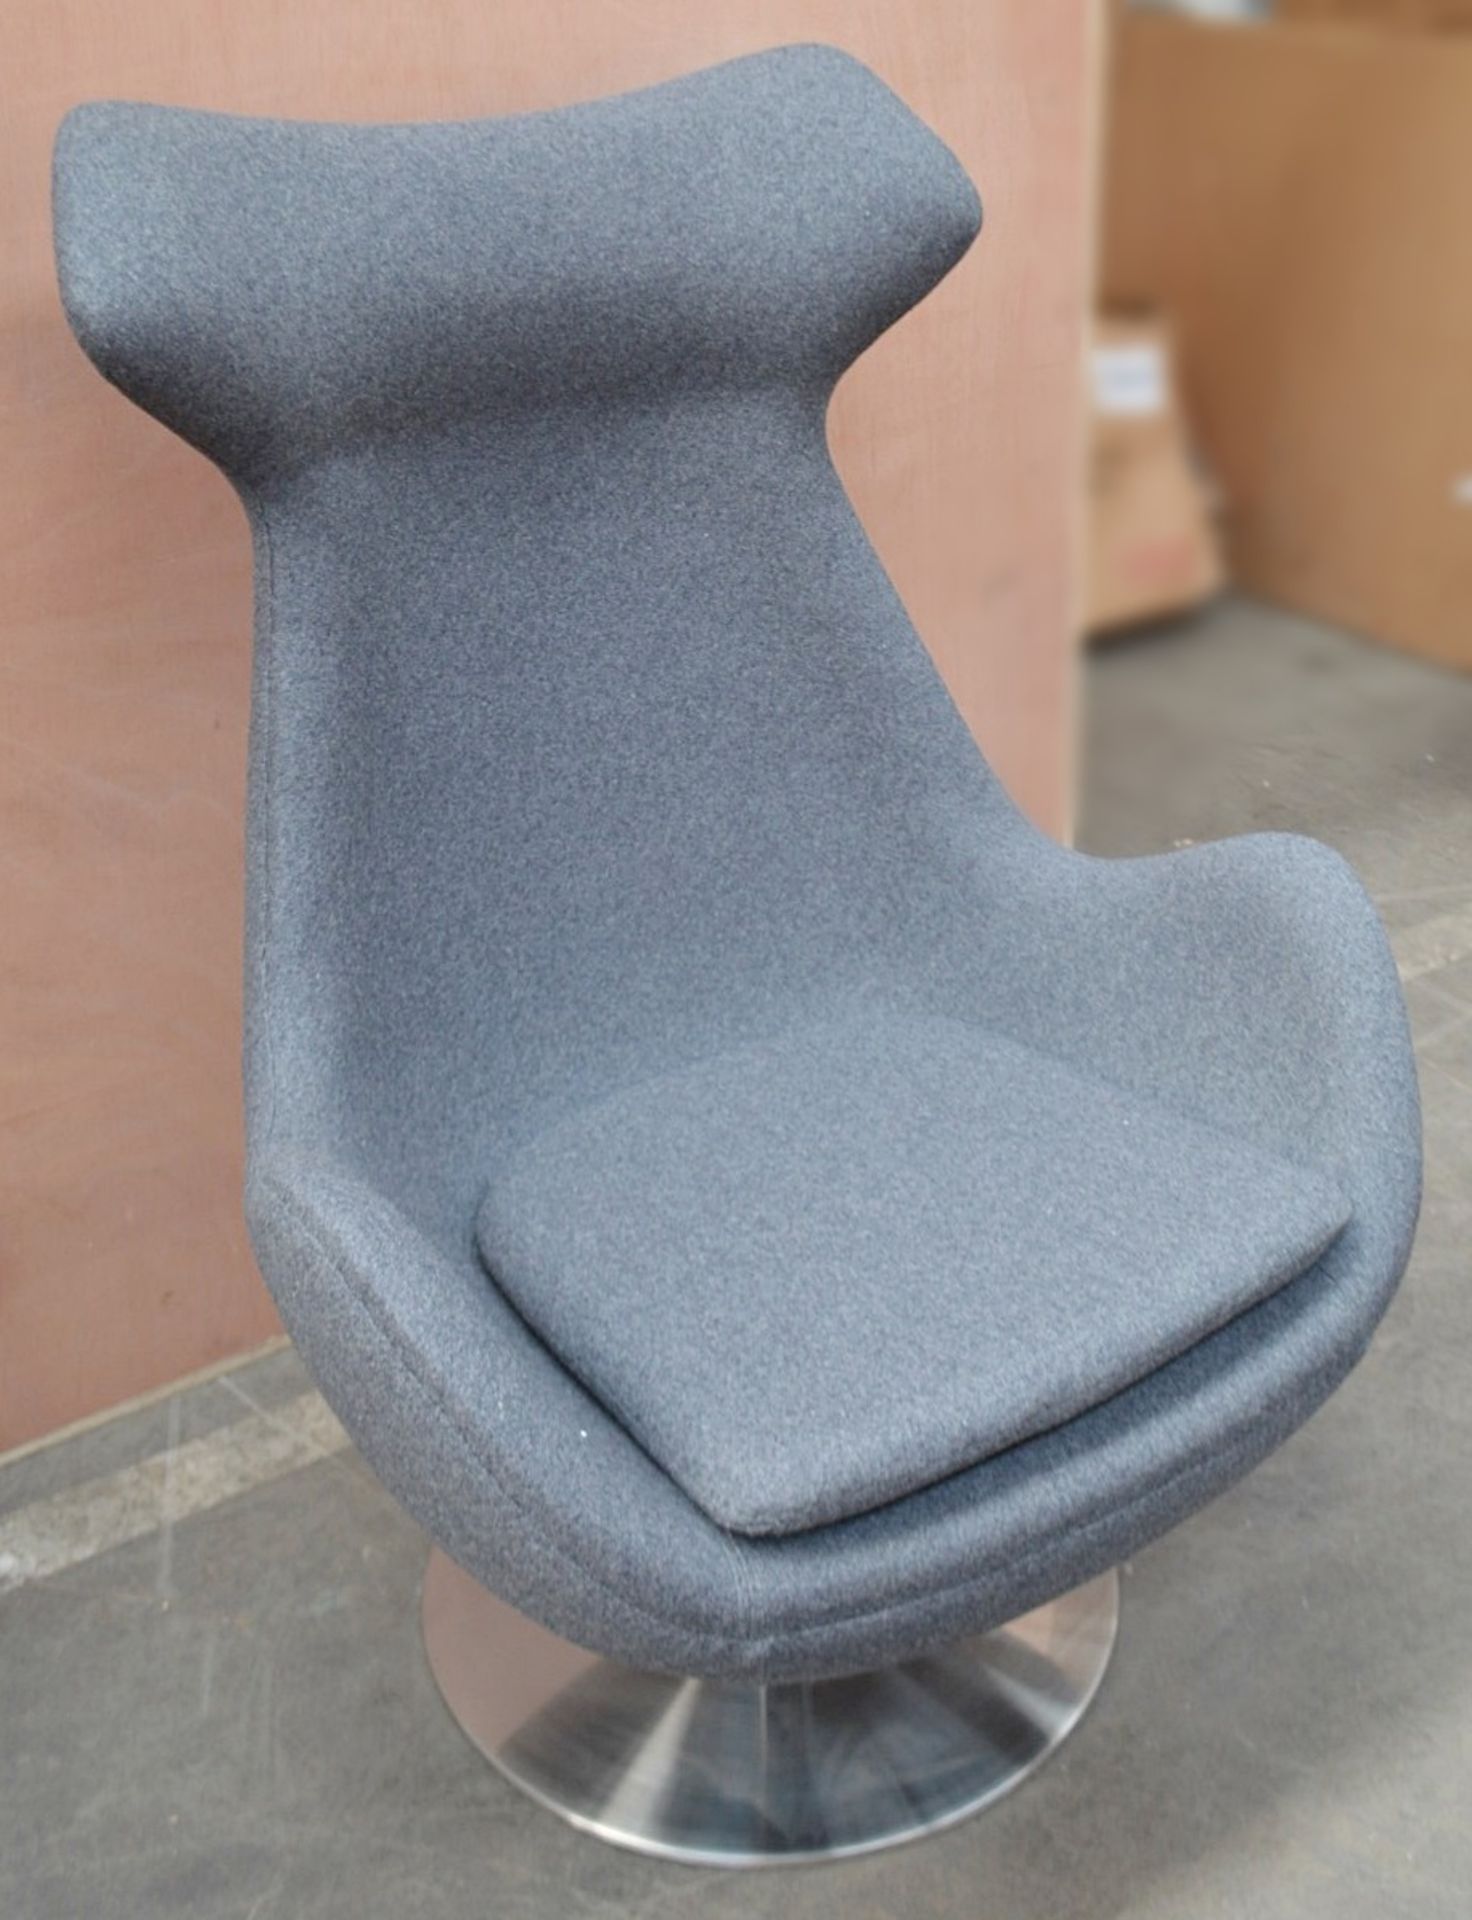 1 x Arne Jacobsen-Inspired Egg Lounge Chair - Upholstered In Grey Cashmere With Steel Base - Image 4 of 13